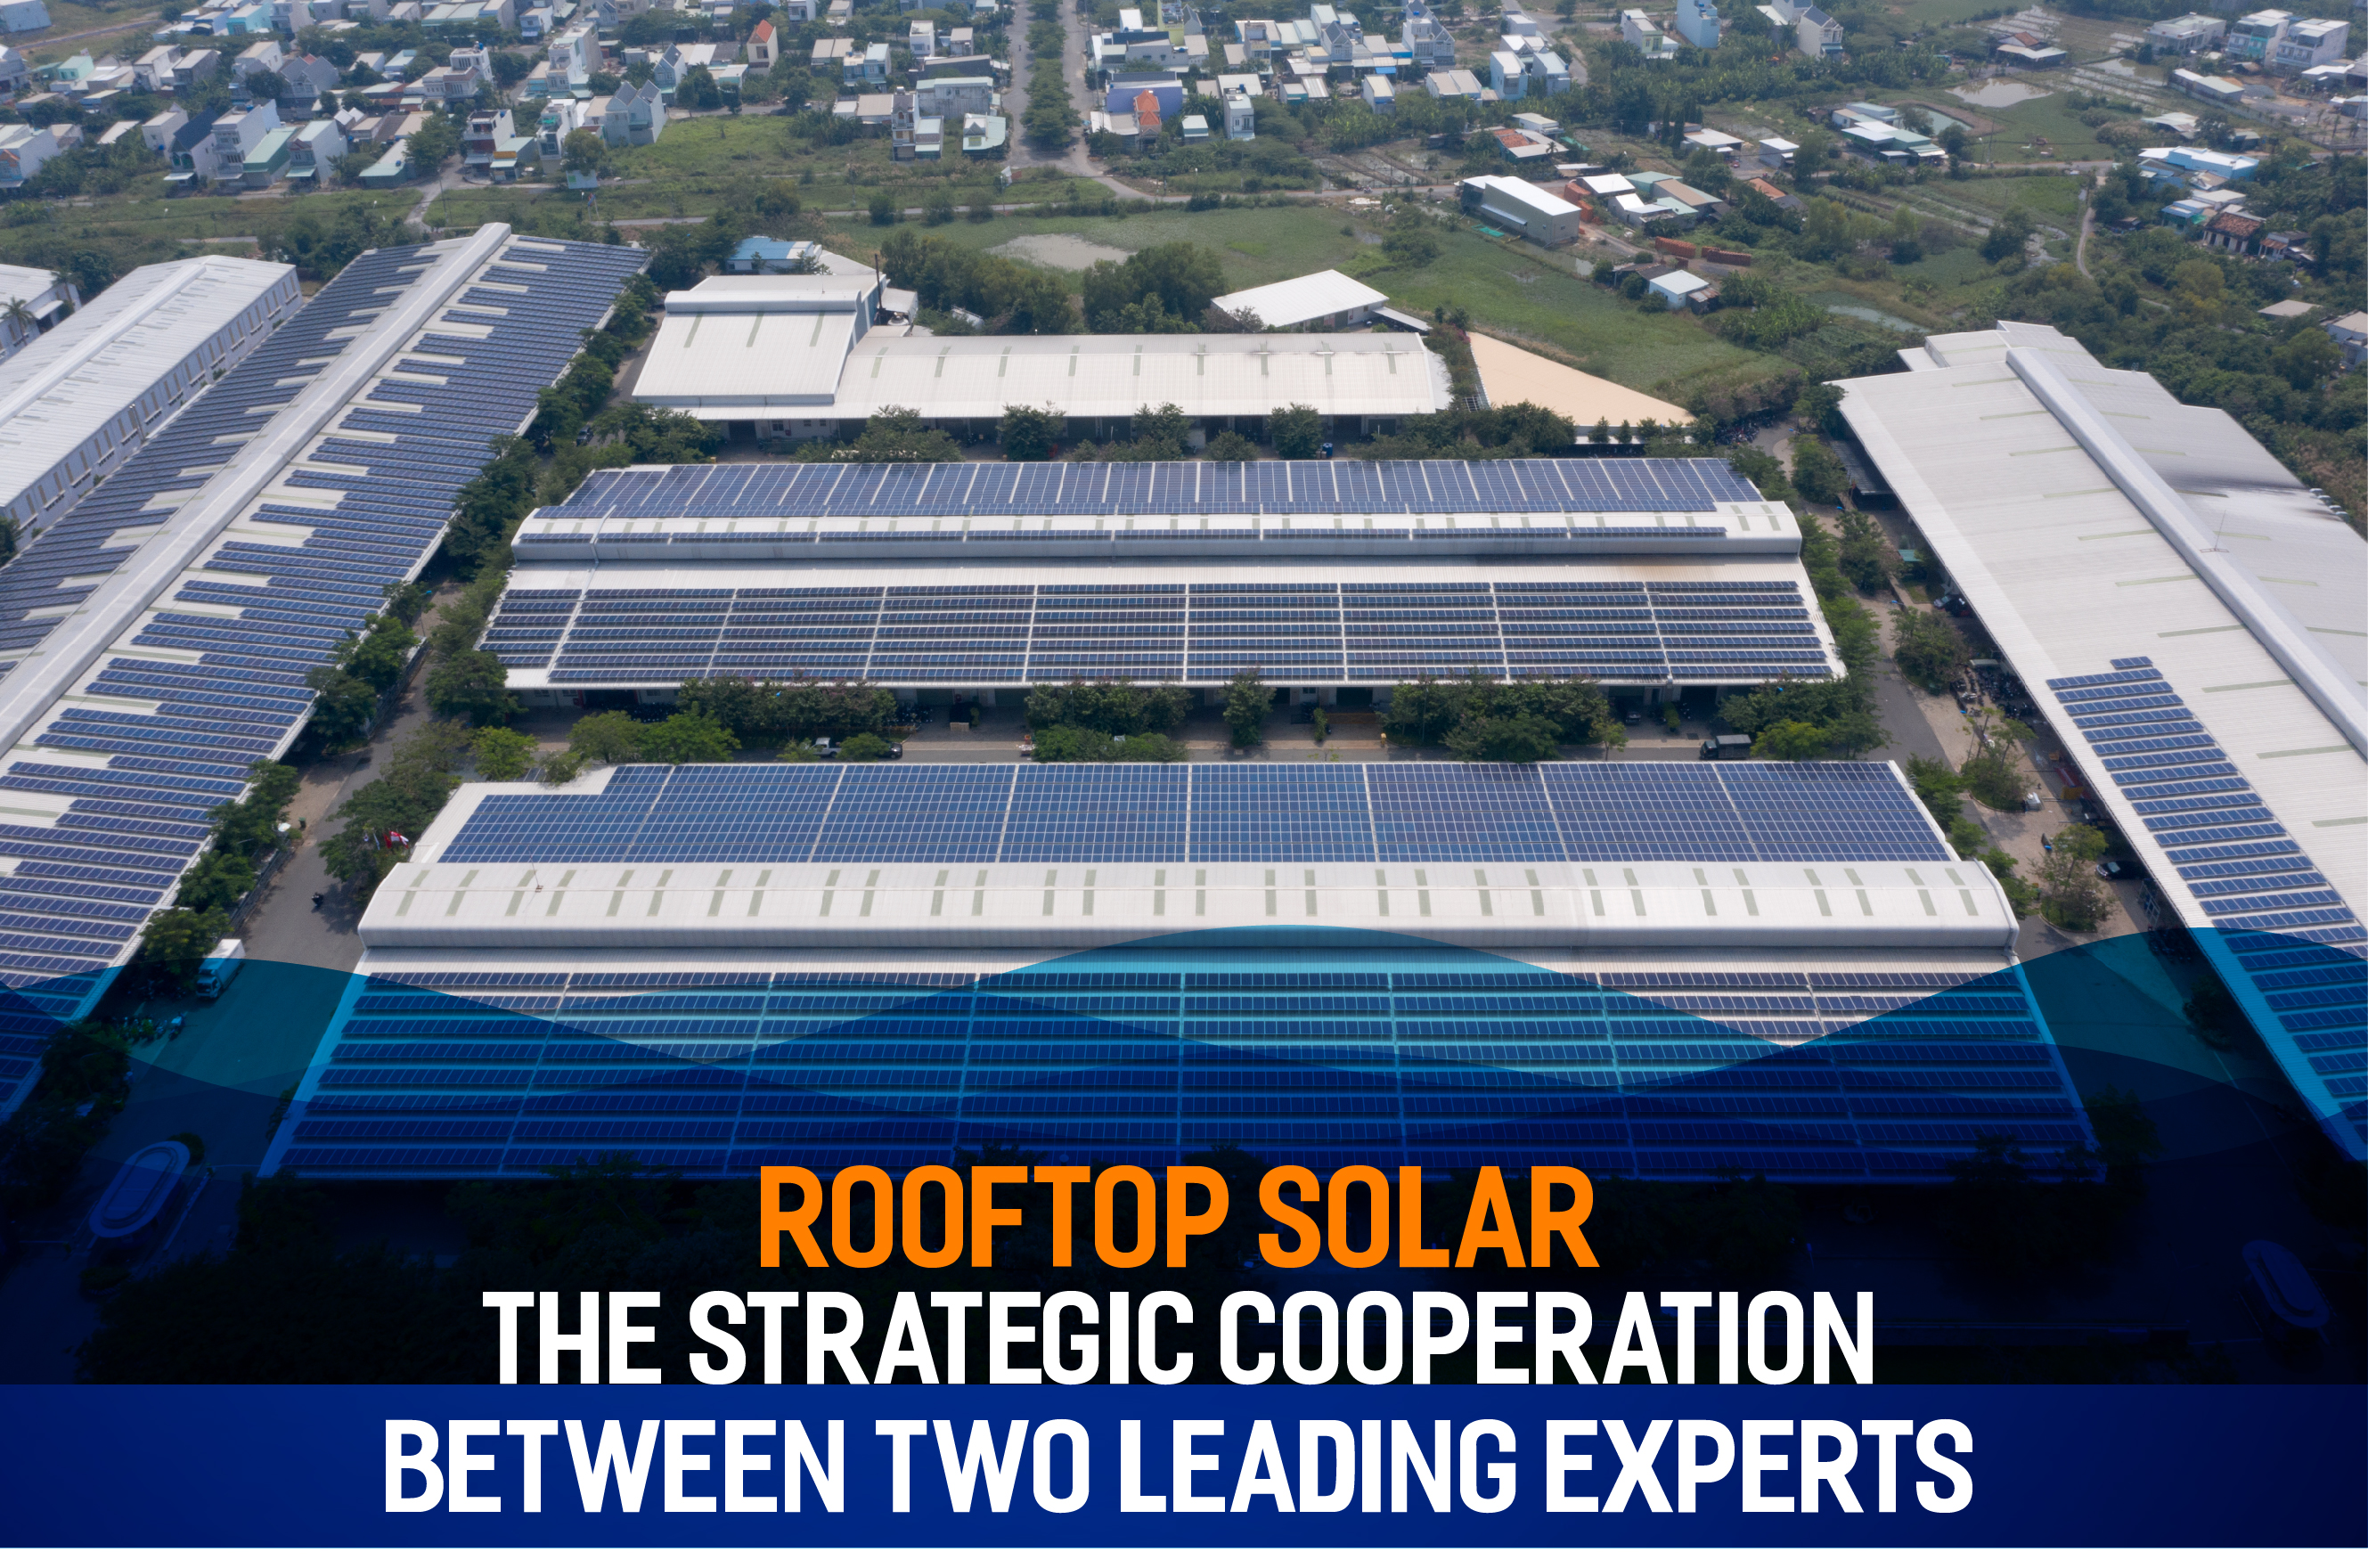 ROOFTOP SOLAR – THE STRATEGIC COOPERATION BETWEEN TWO LEADING EXPERTS